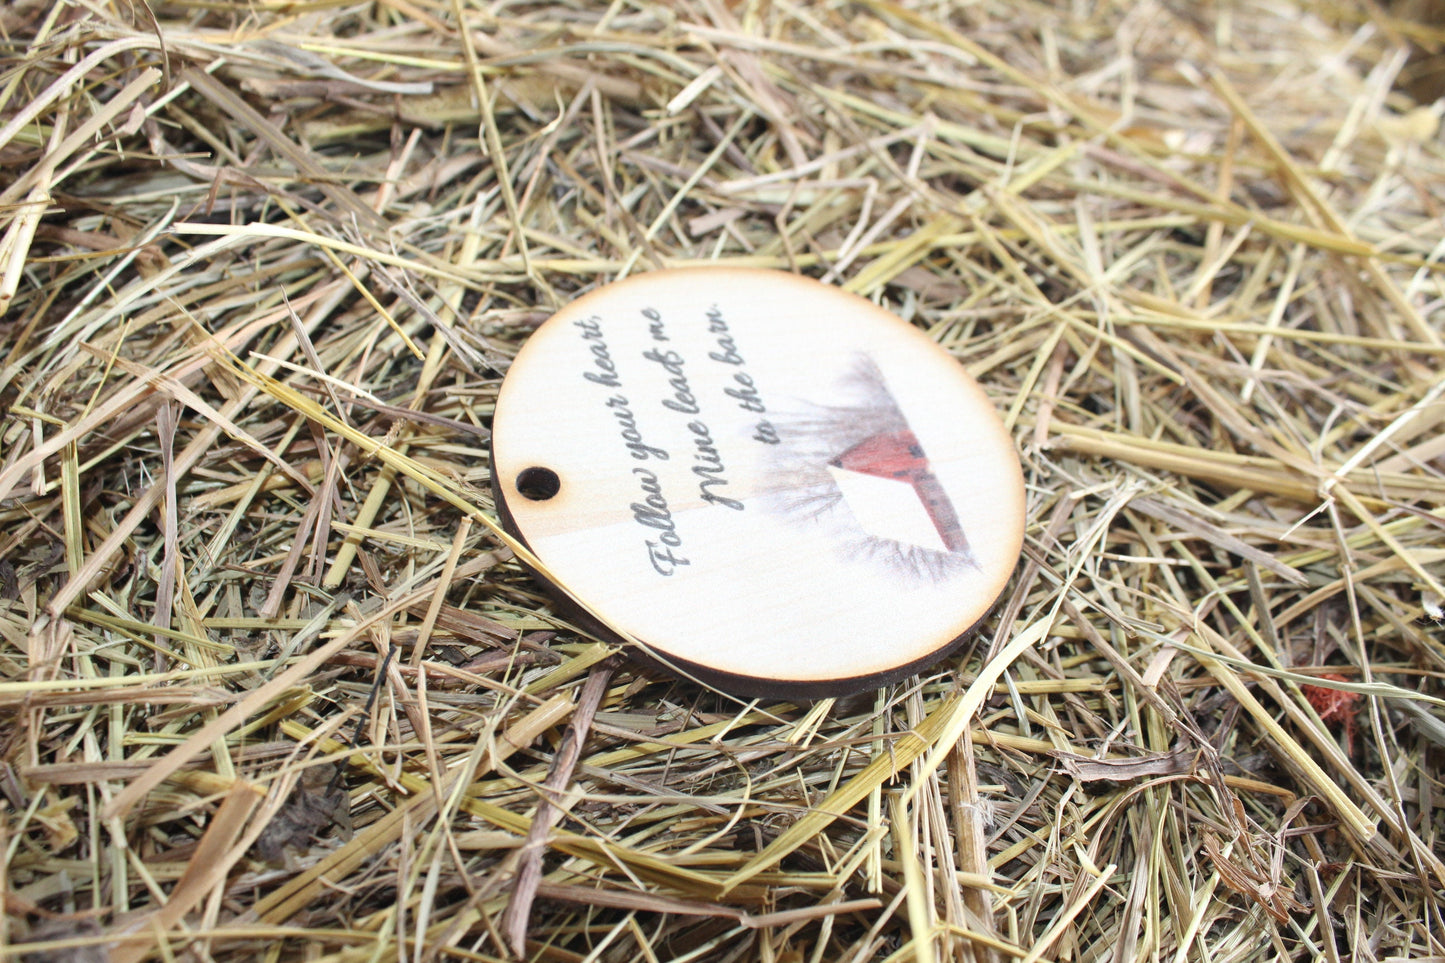 Follow Your Heart Mine Leads Me To The Barn Christmas Ornament Wood Slice Keychain Animal Lover Wood Circle Sign Gift Farm